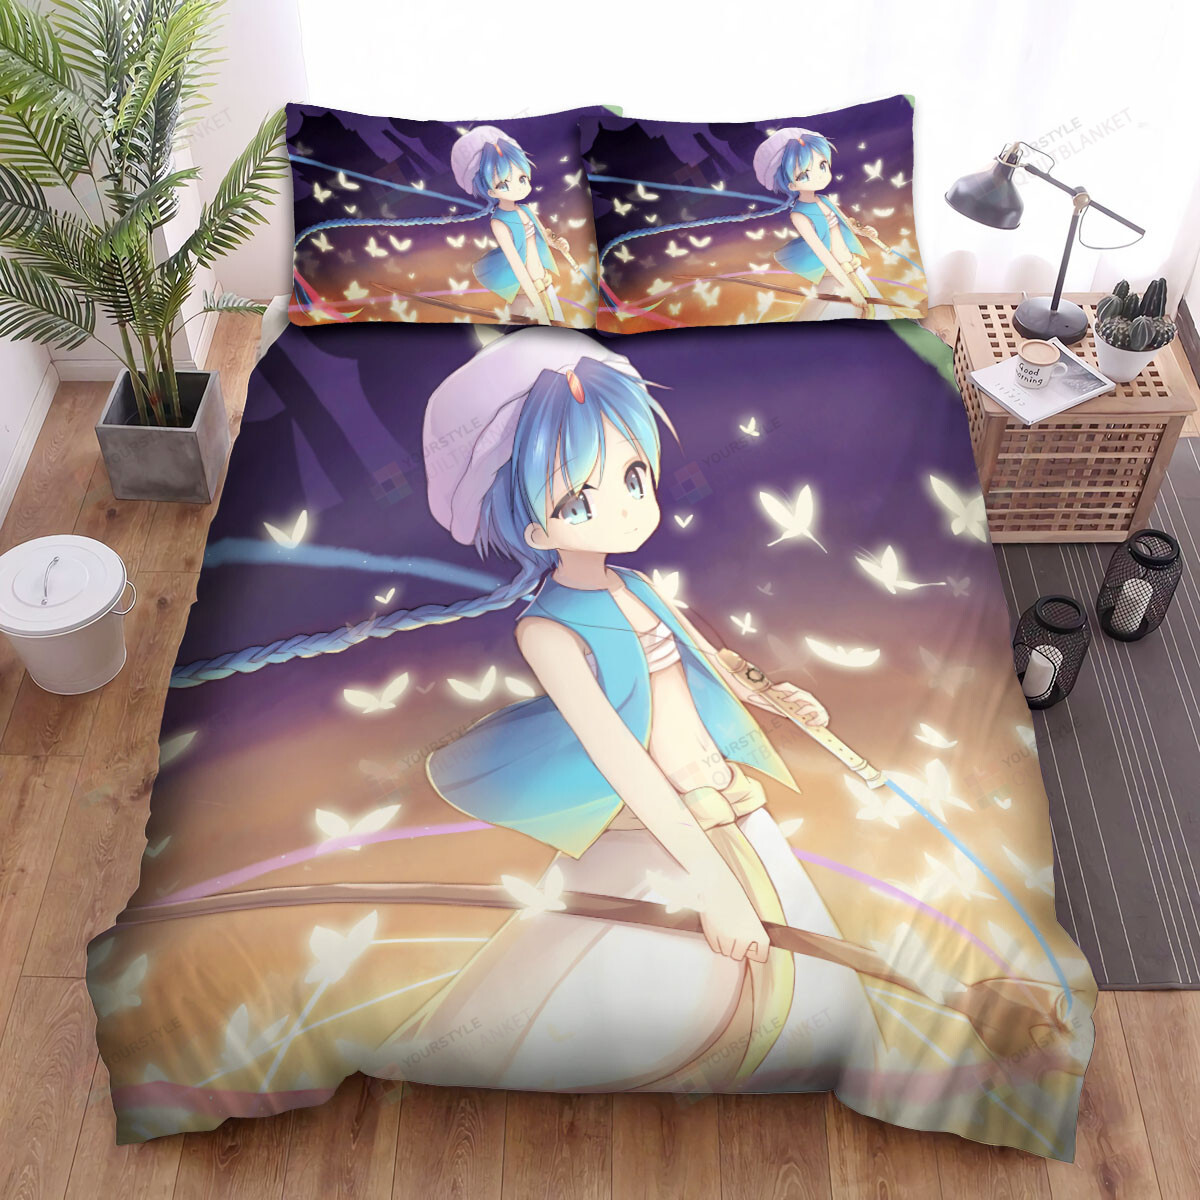 Magi Characters Aladdin With The Butterflies Bed Sheets Spread Comforter Duvet Cover Bedding Sets